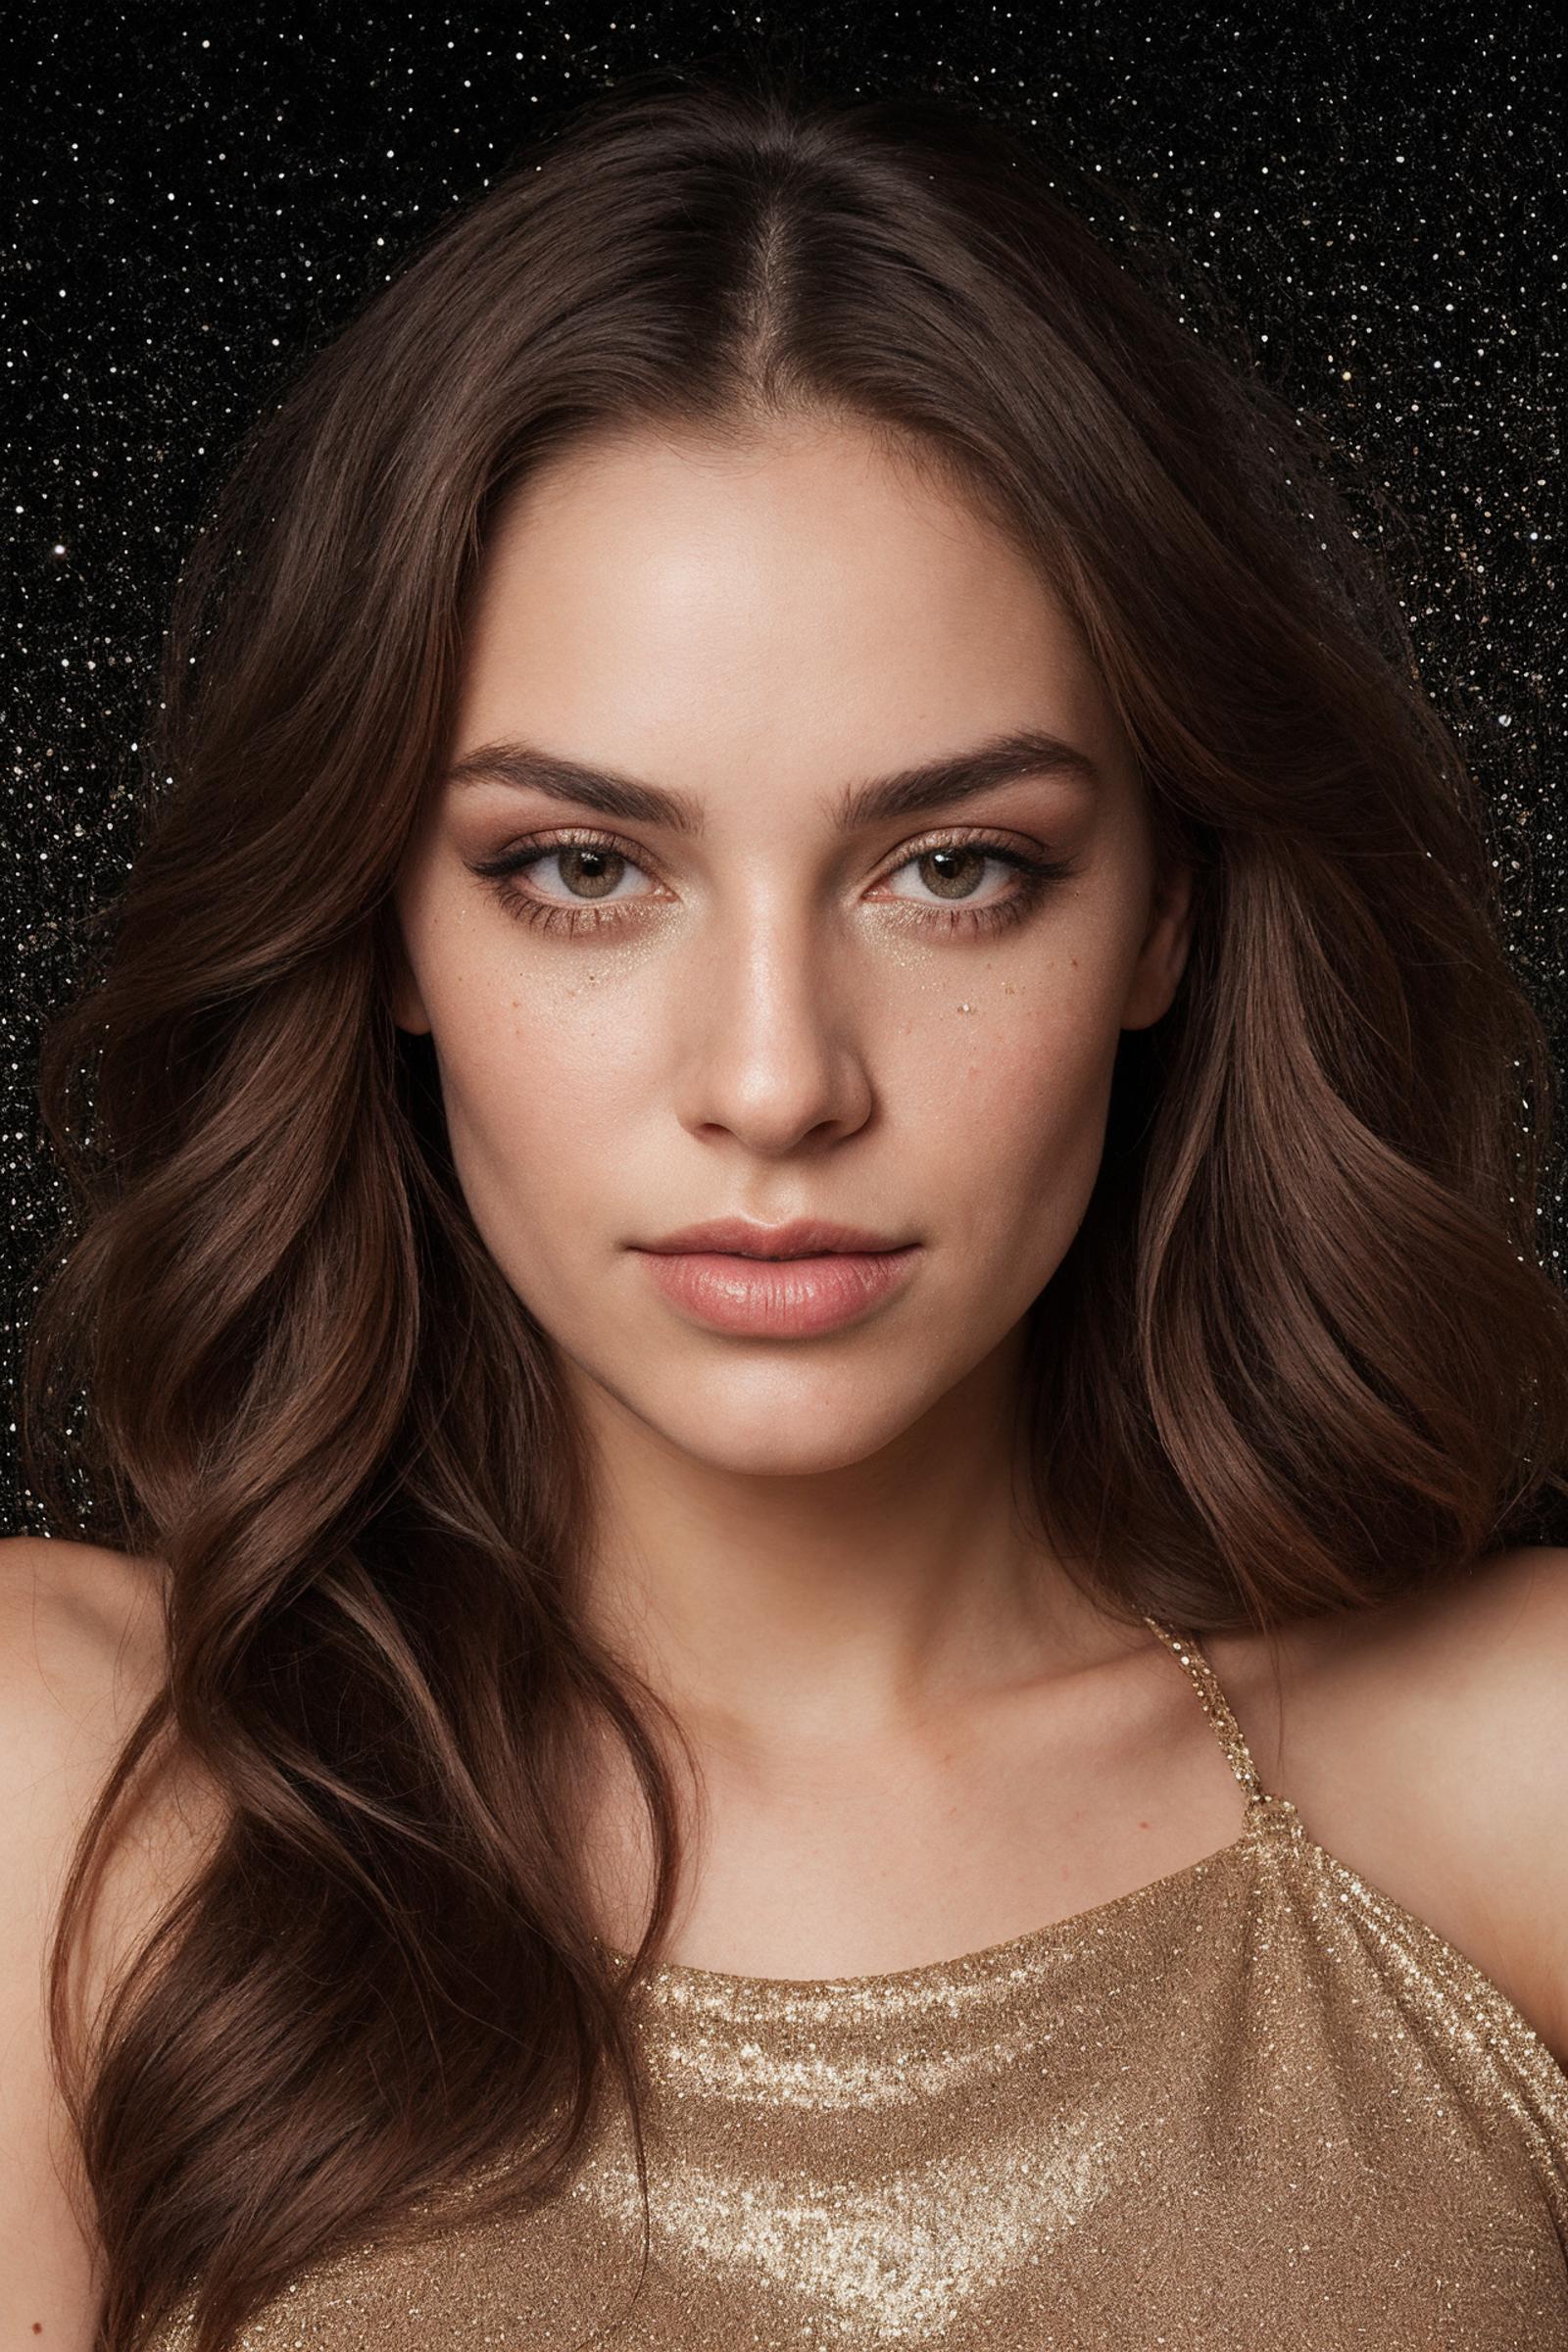 "Close-up of a young woman with dark hair and gold eyeshadow."